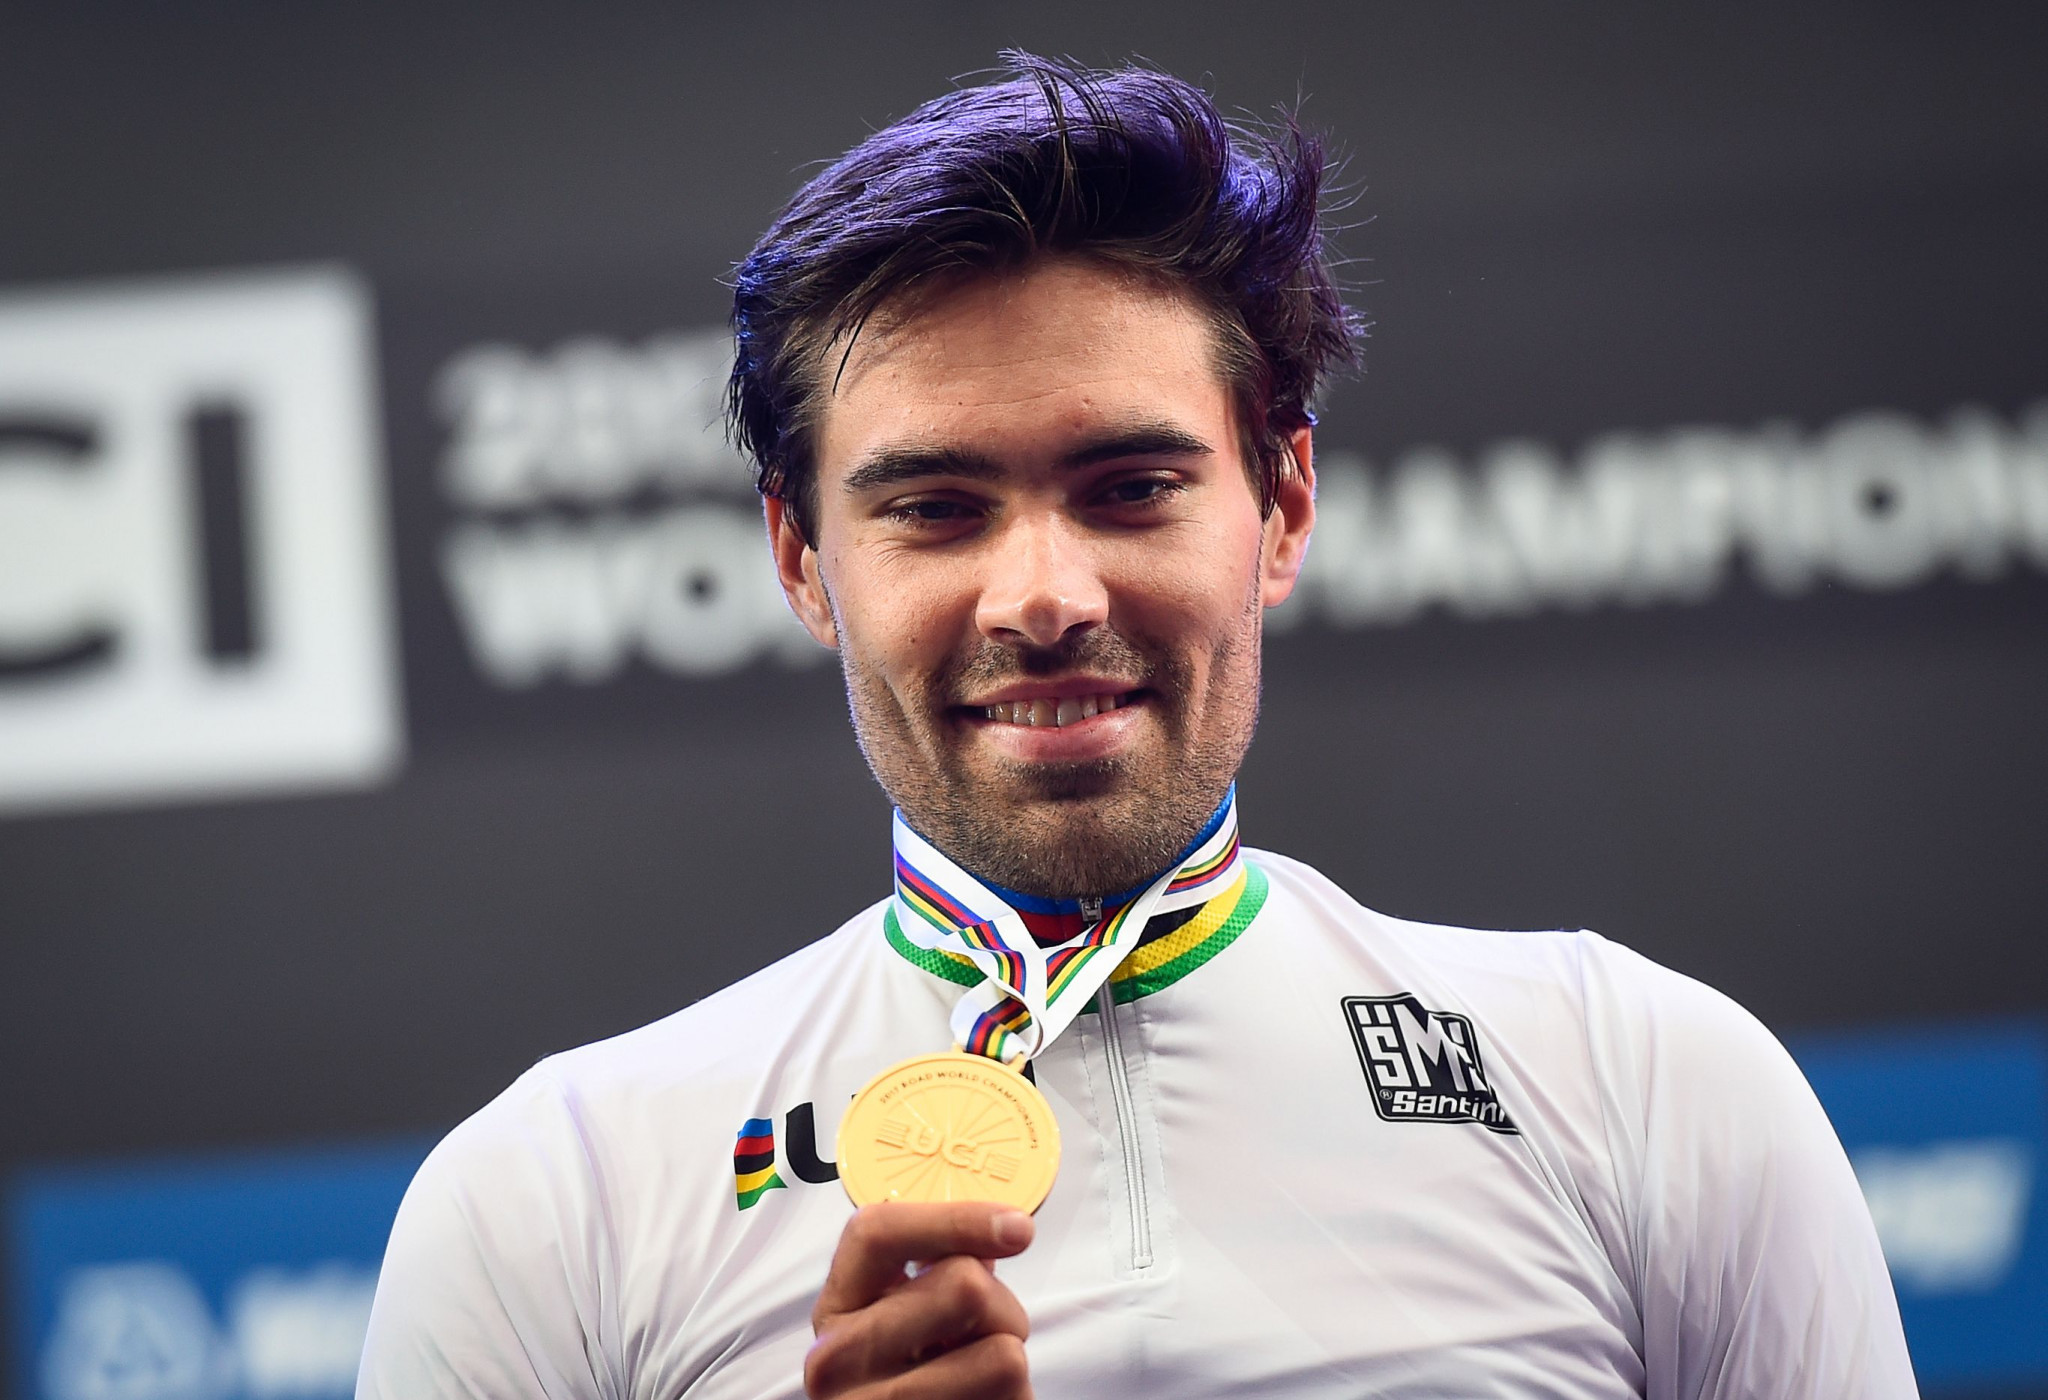 Tom Dumoulin produced a fine performance to win the men's elite time trial gold ©Getty Images